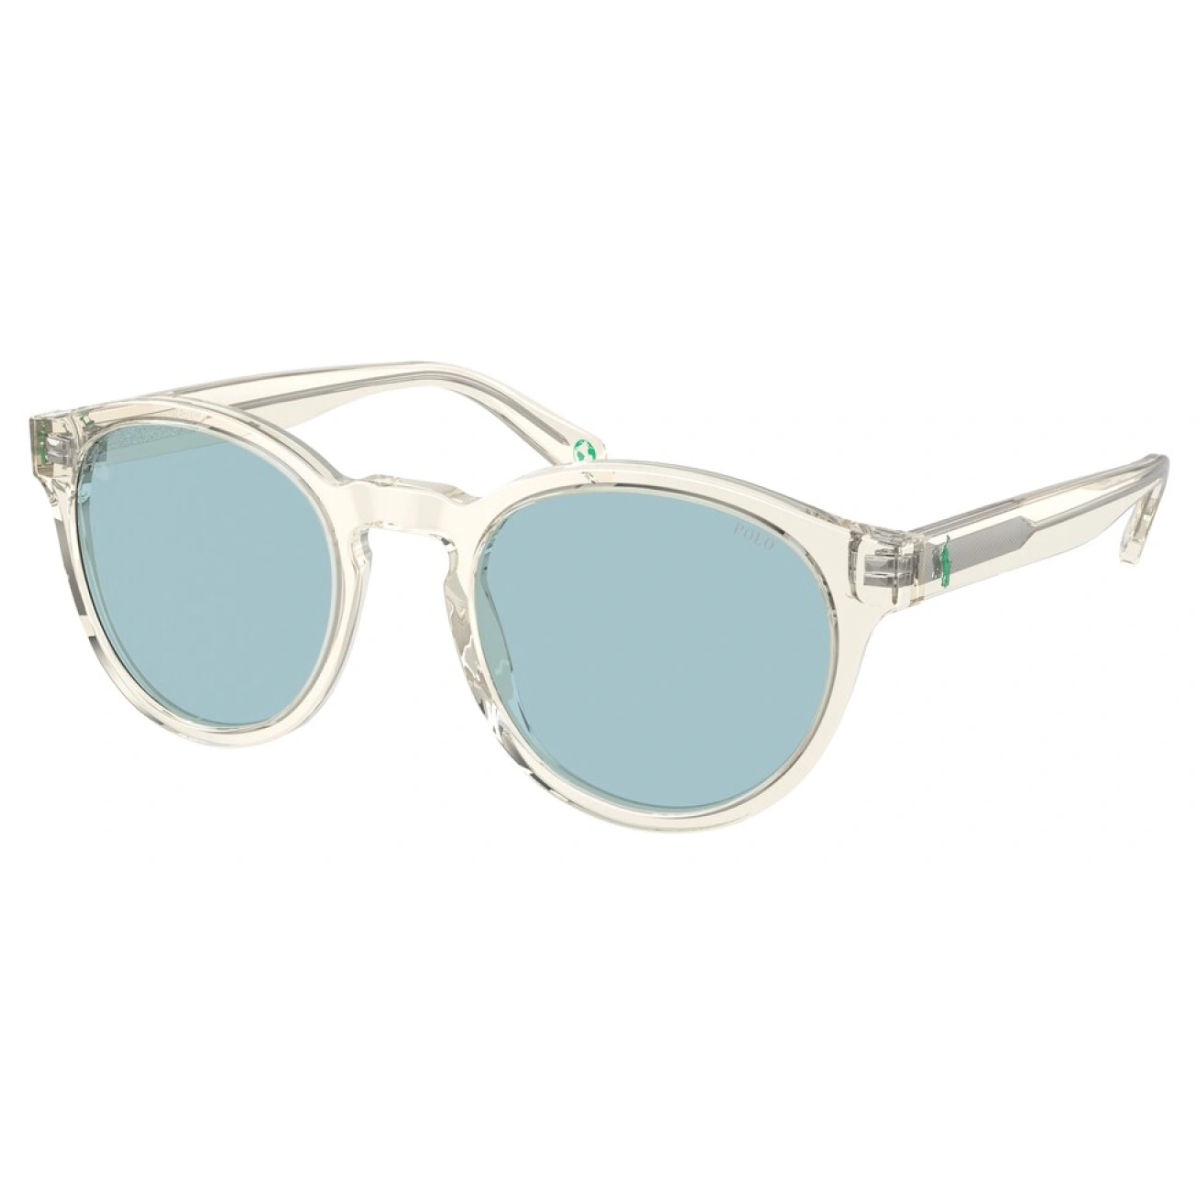 "Ralph Lauren Polo PH4192 Sunglasses for Men and Women at Optorium! Browse our collection of stylish sunglasses with a square shape design and cooling features"